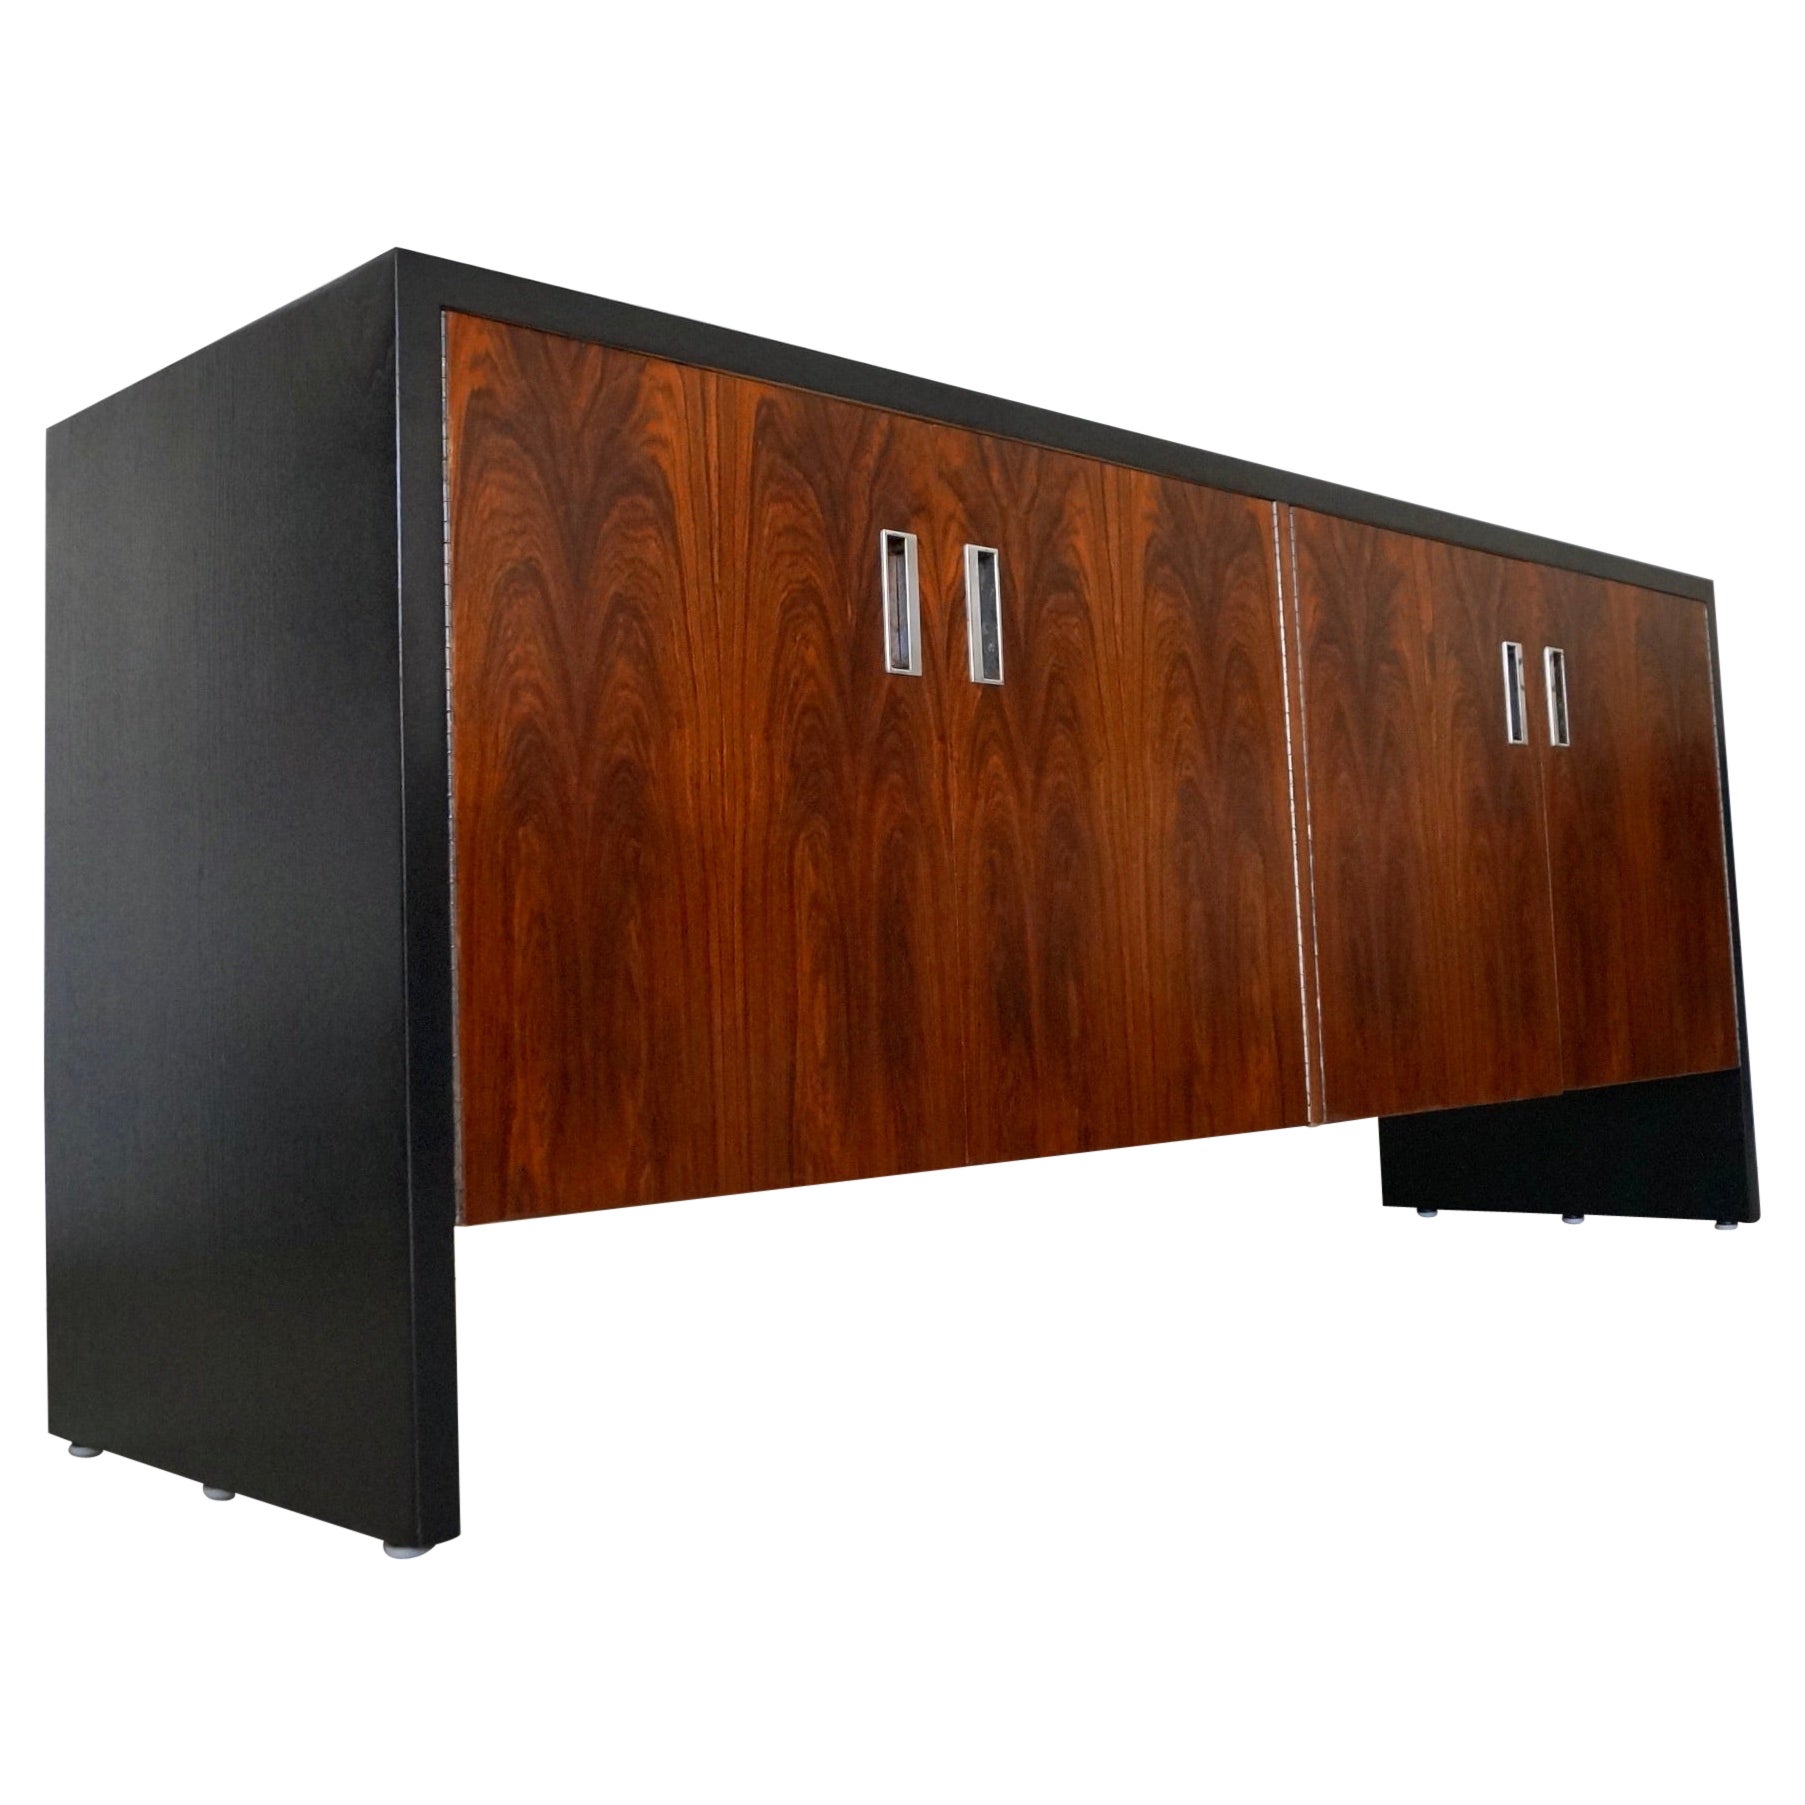 1970's Mid-Century Modern Robert Baron Rosewood Credenza / Sideboard For Sale